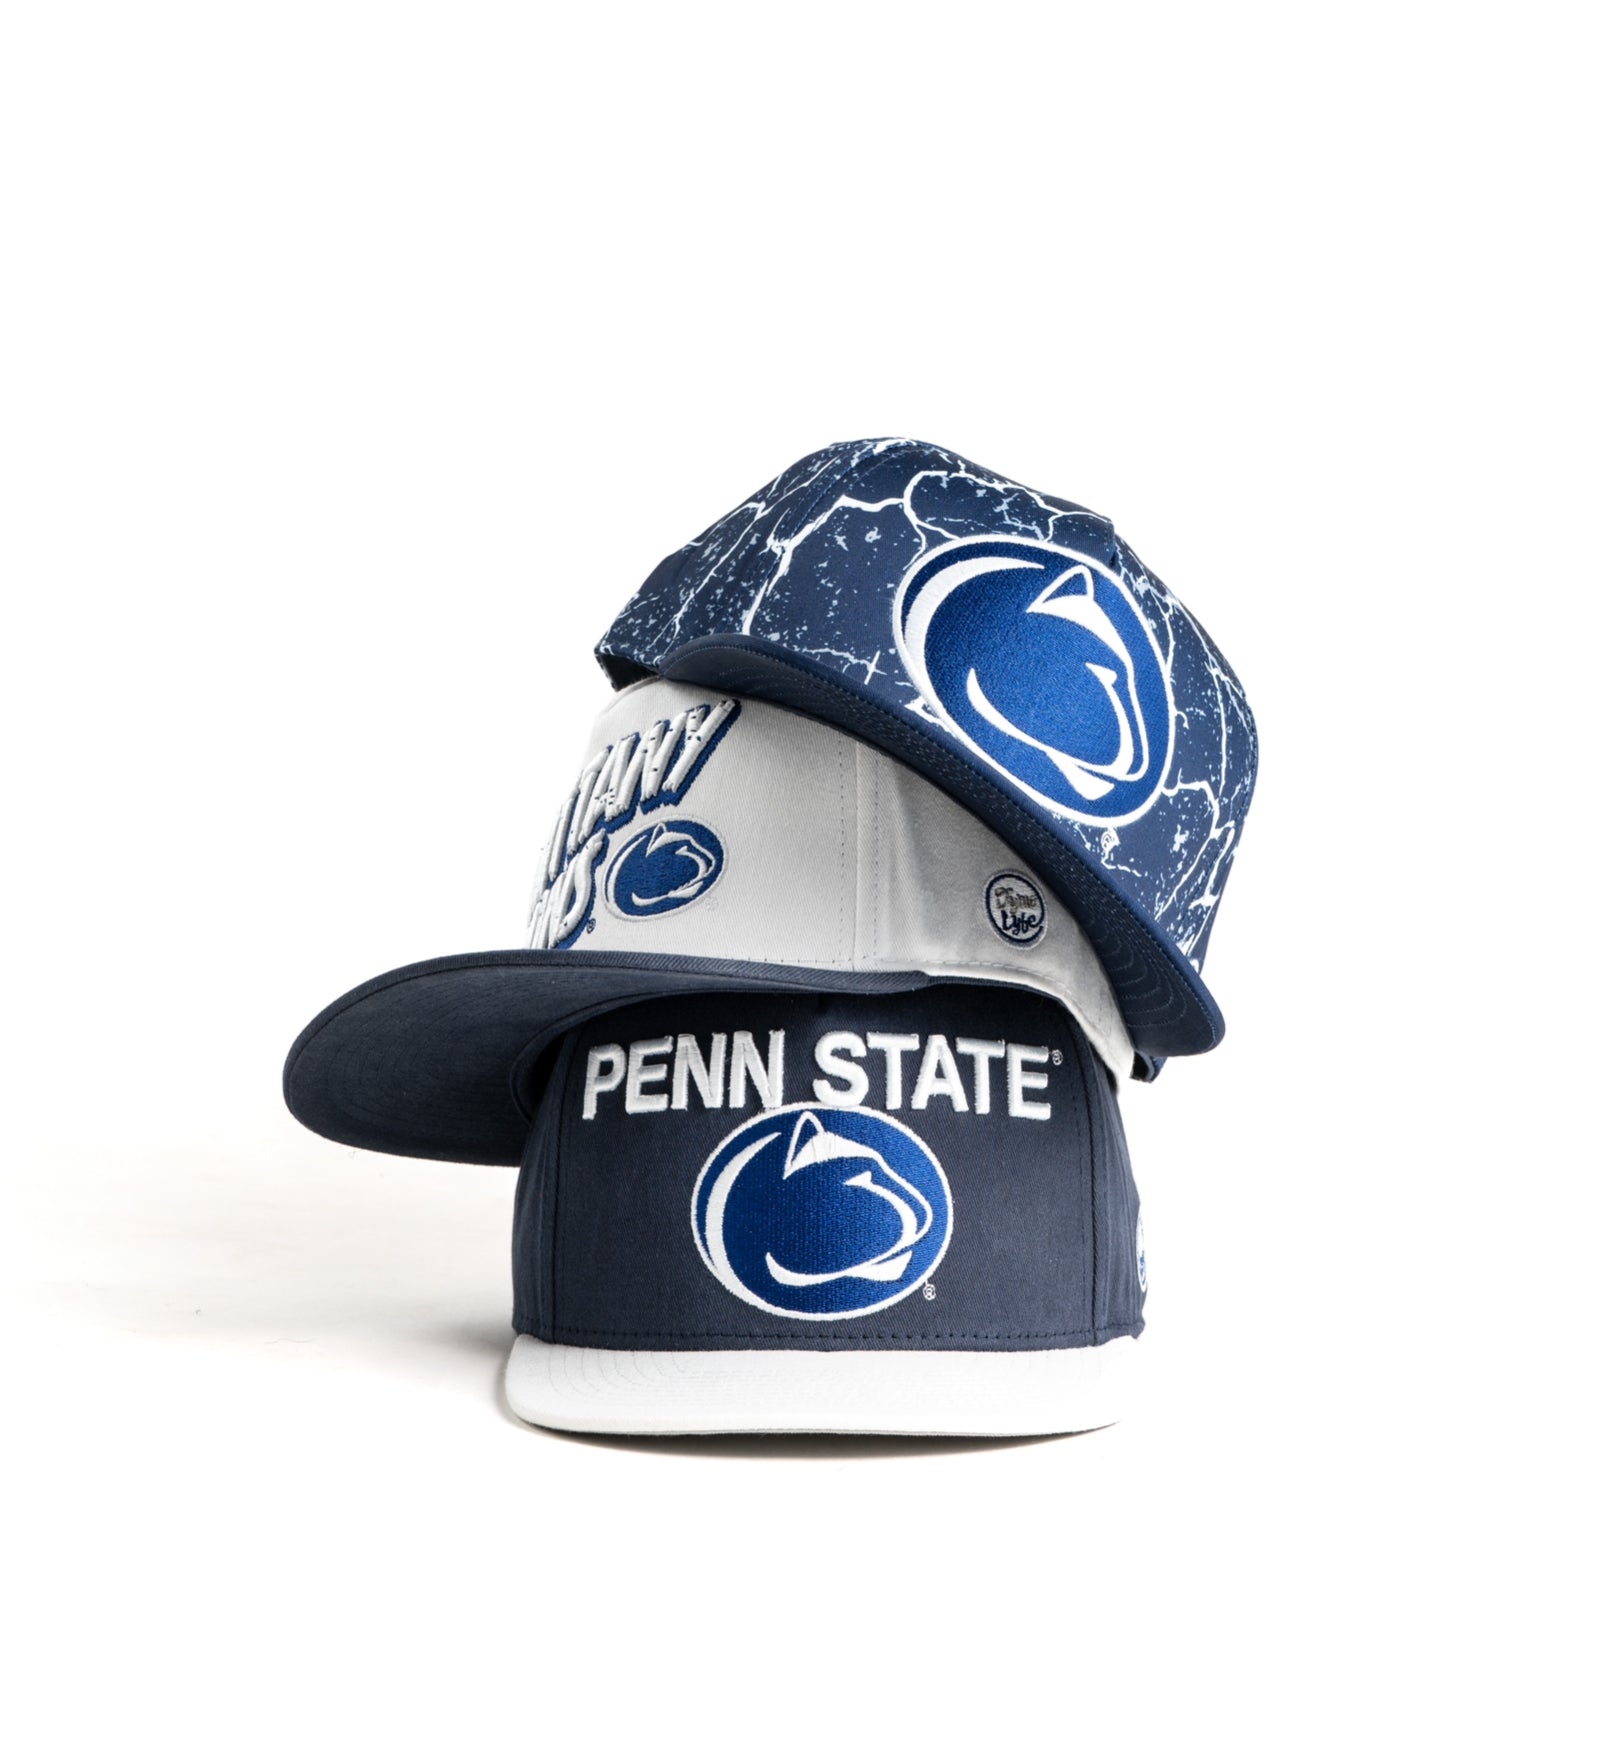 Penn State Nittany Lions 3 Item Mystery Box